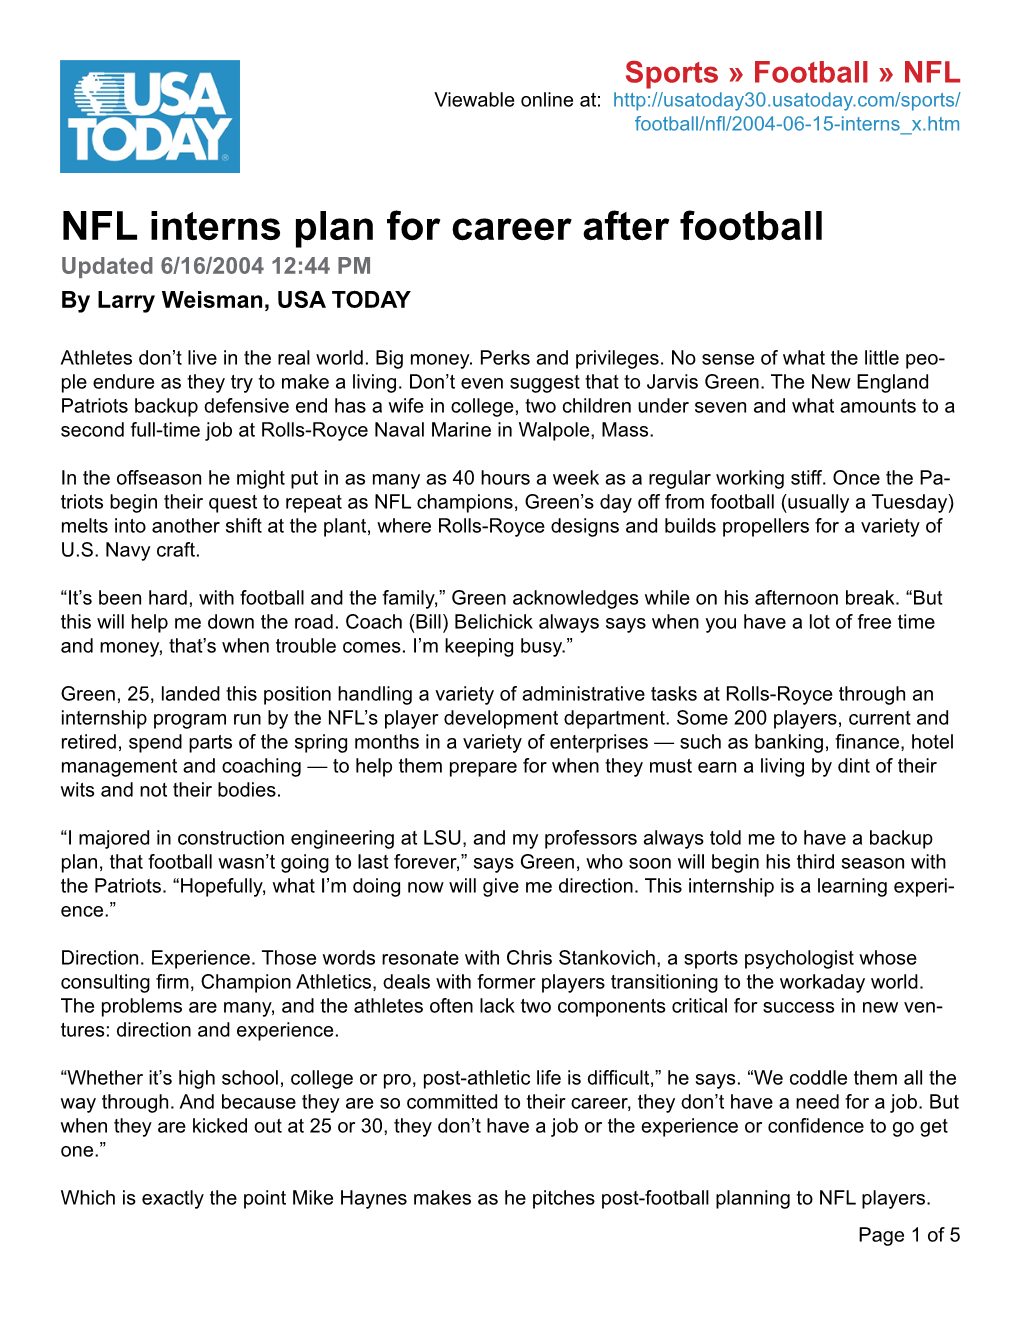 NFL Interns Plan for Career After Football USA Today